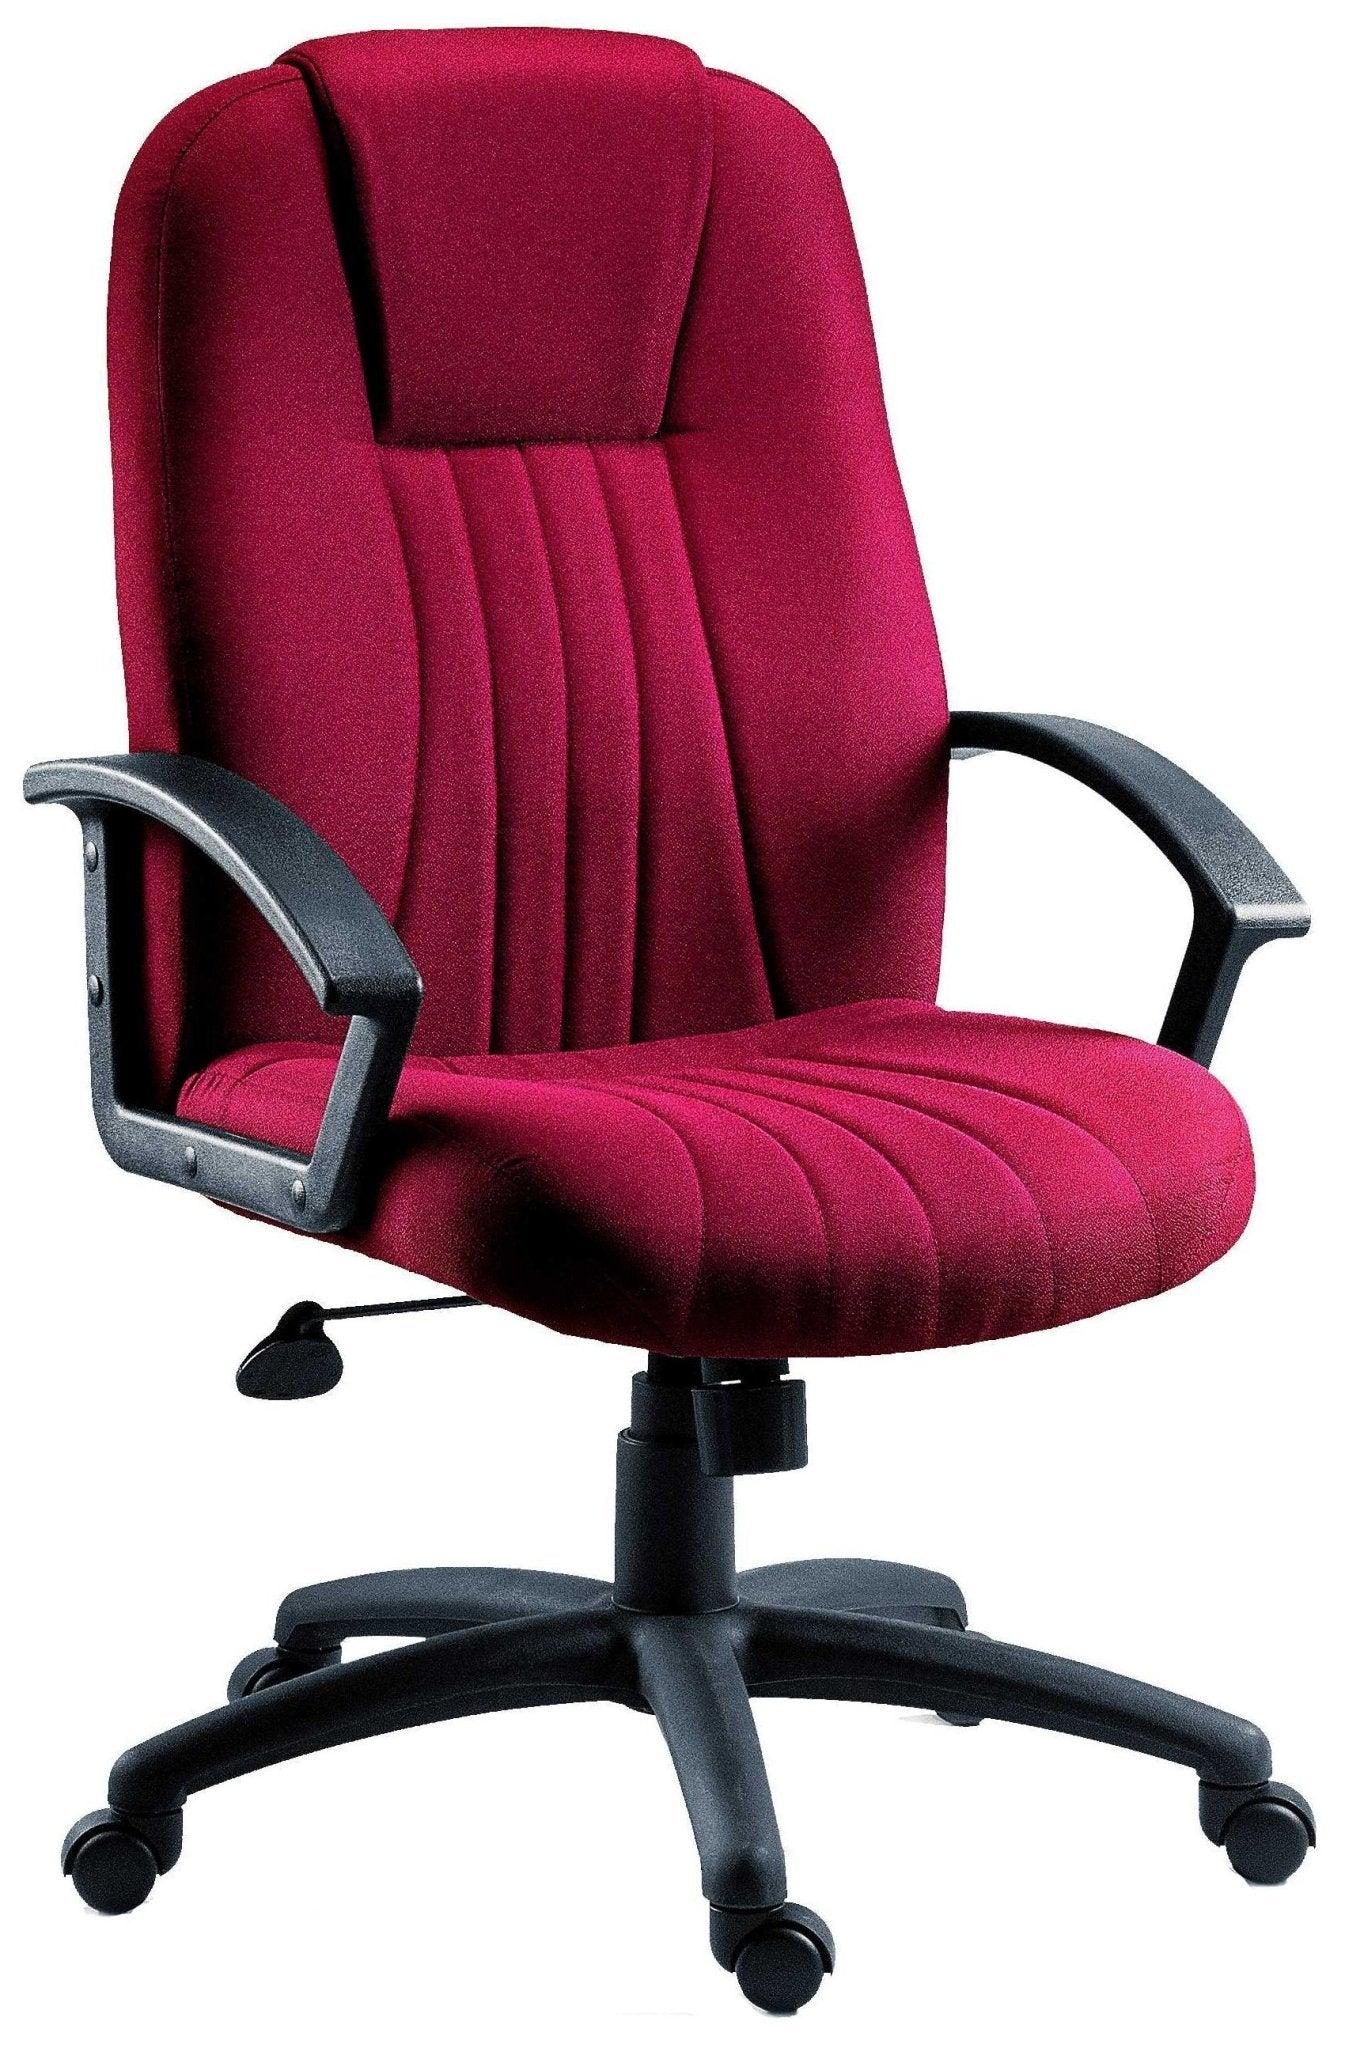 City fabric office chair (burgundy) - image 1